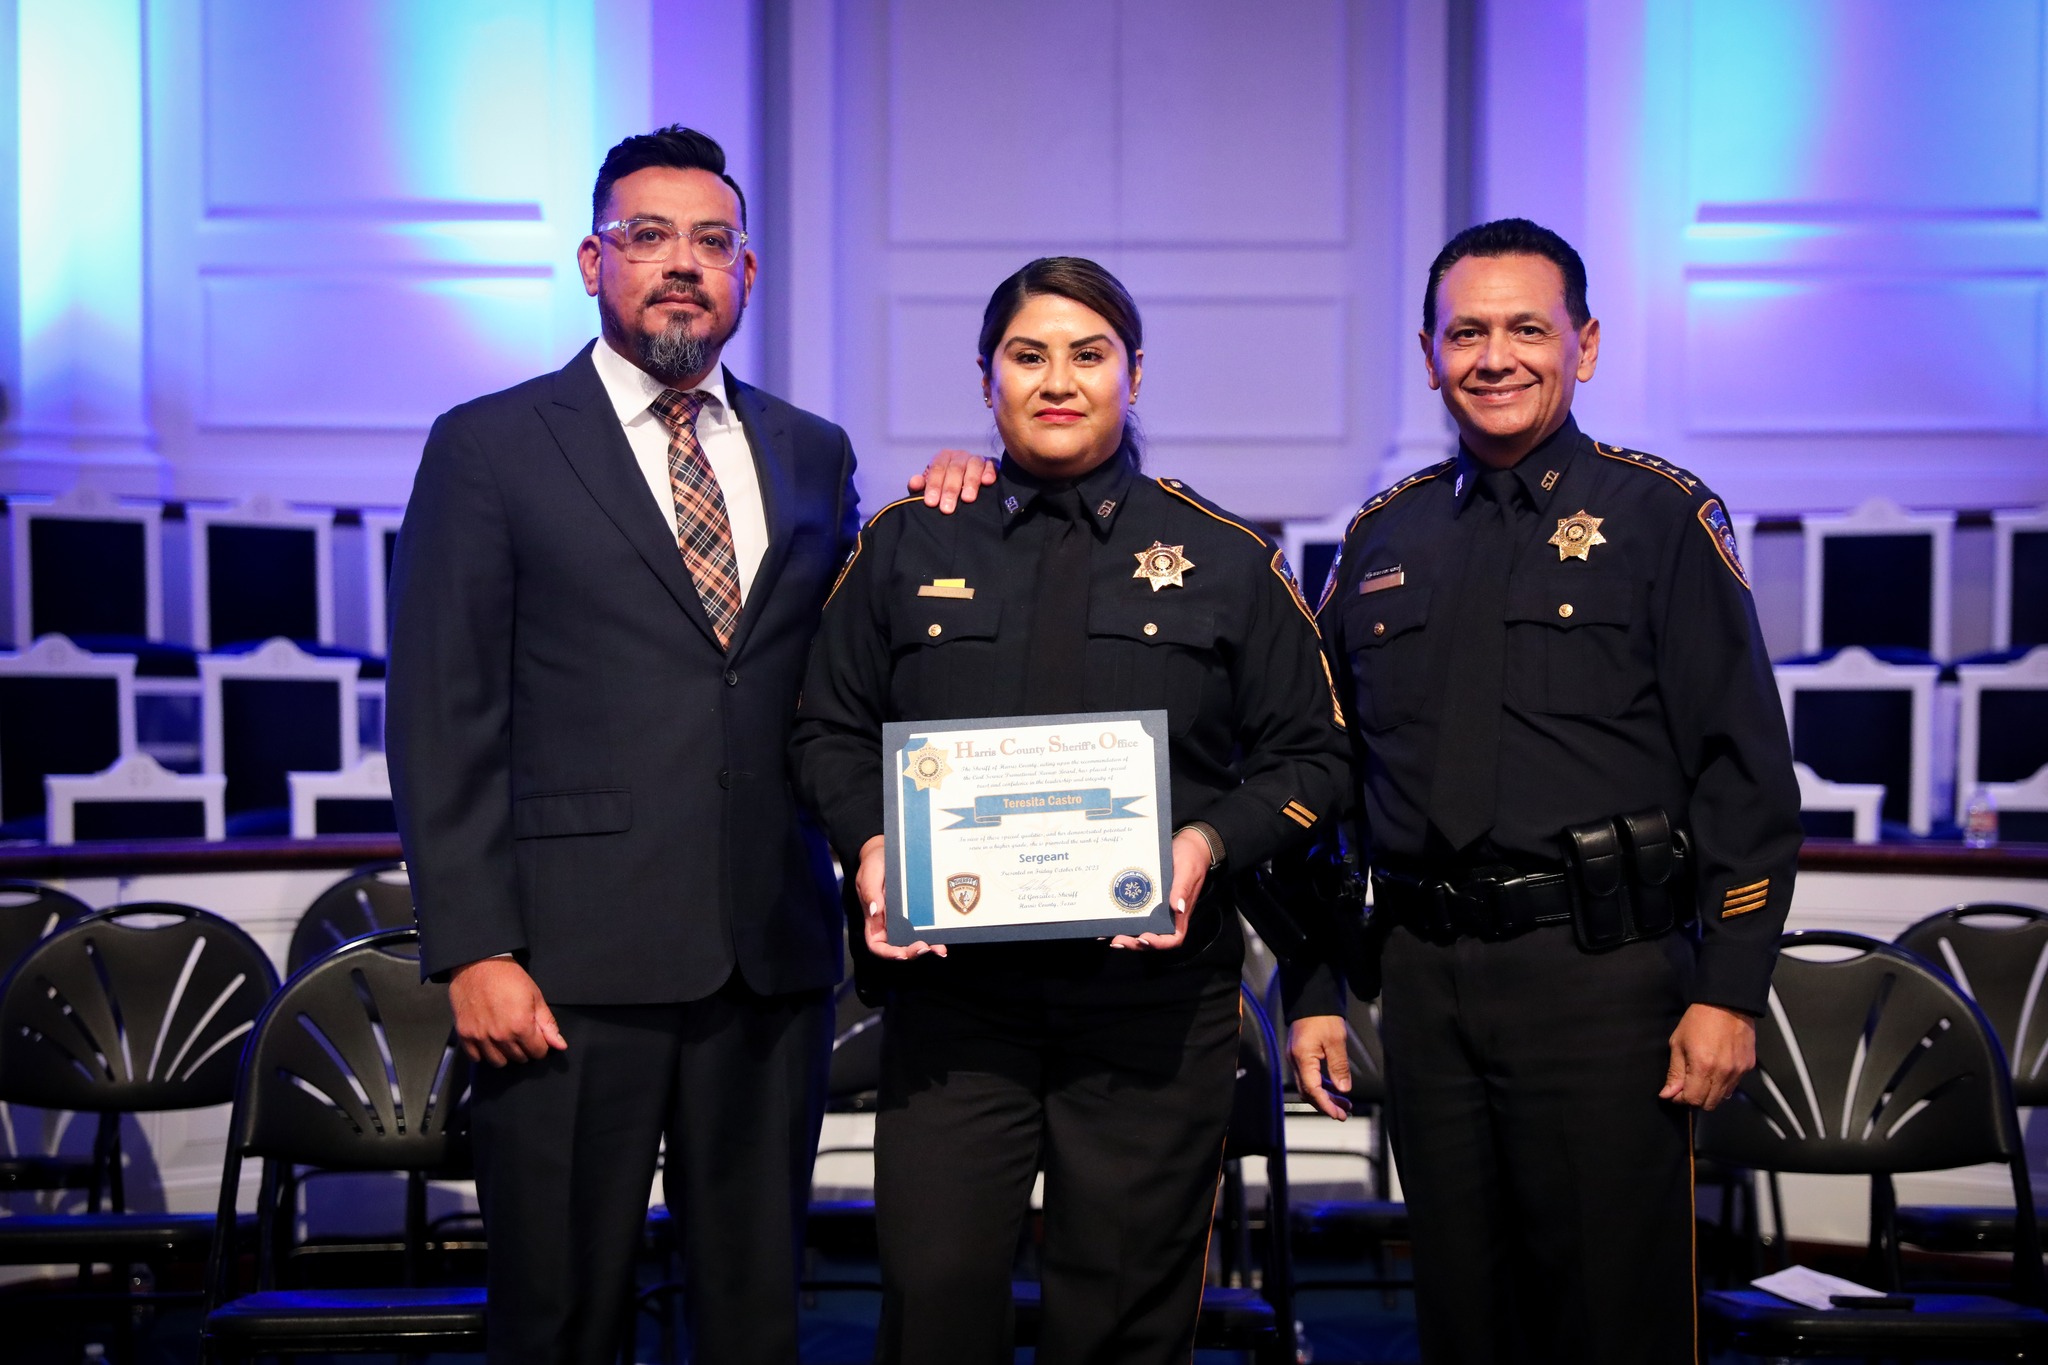 Harris County Sheriff's Office Honors National Hispanic Heritage Month